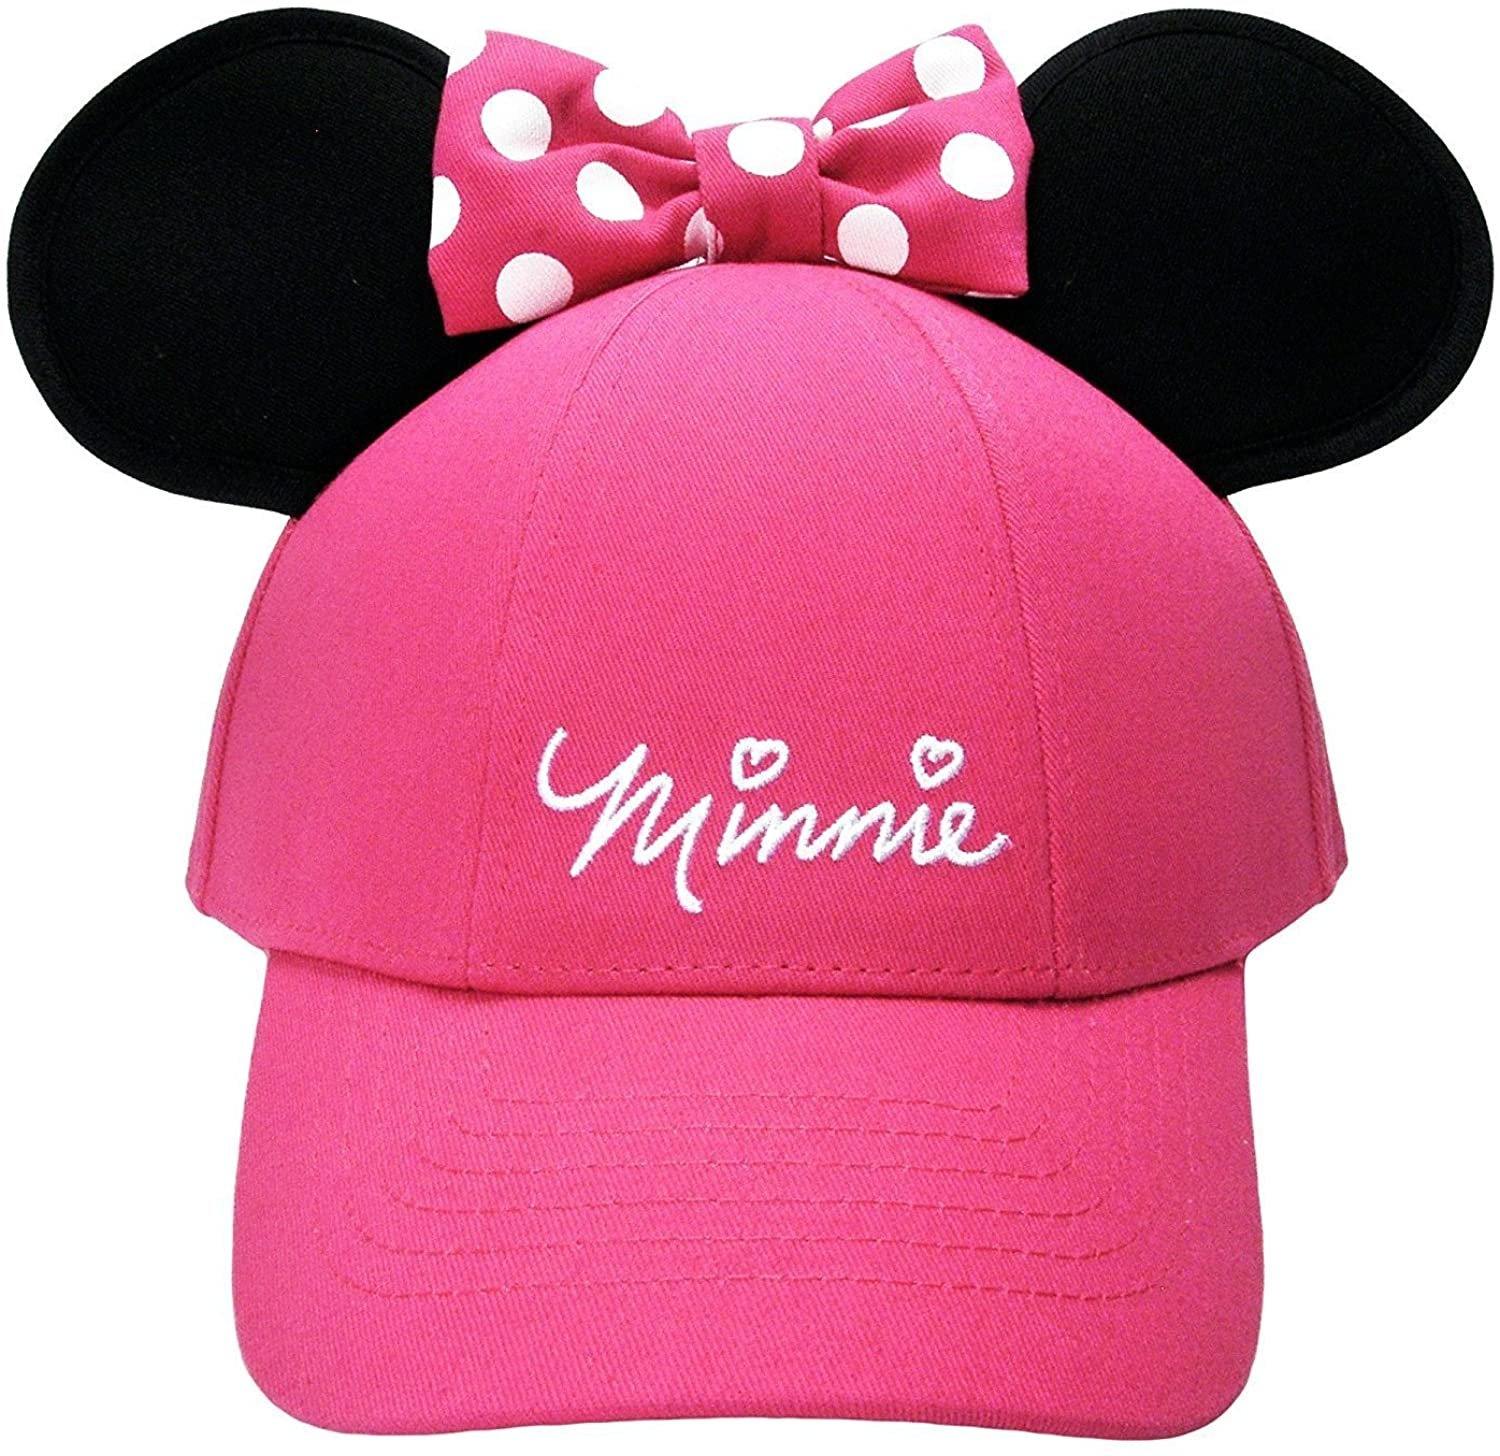 Disney Minnie Mouse Sassy Bow Ear Adult Hat Pink